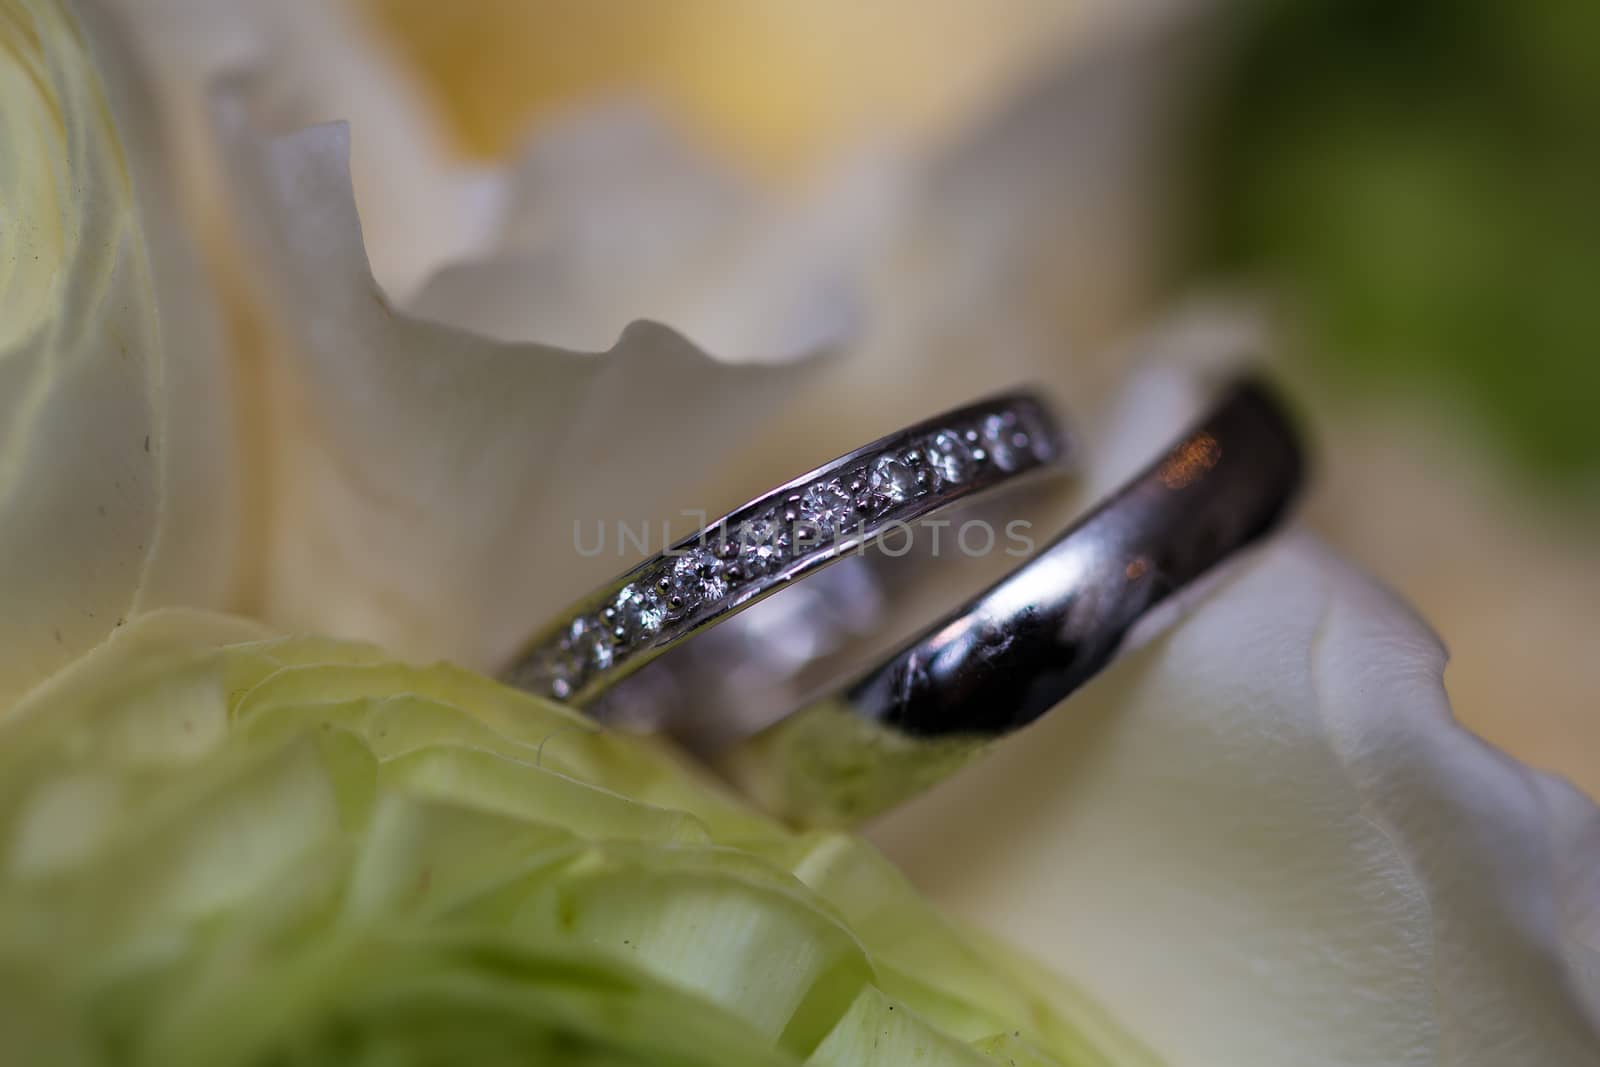 The wedding bouquet and silver rings. Shallow DOF.